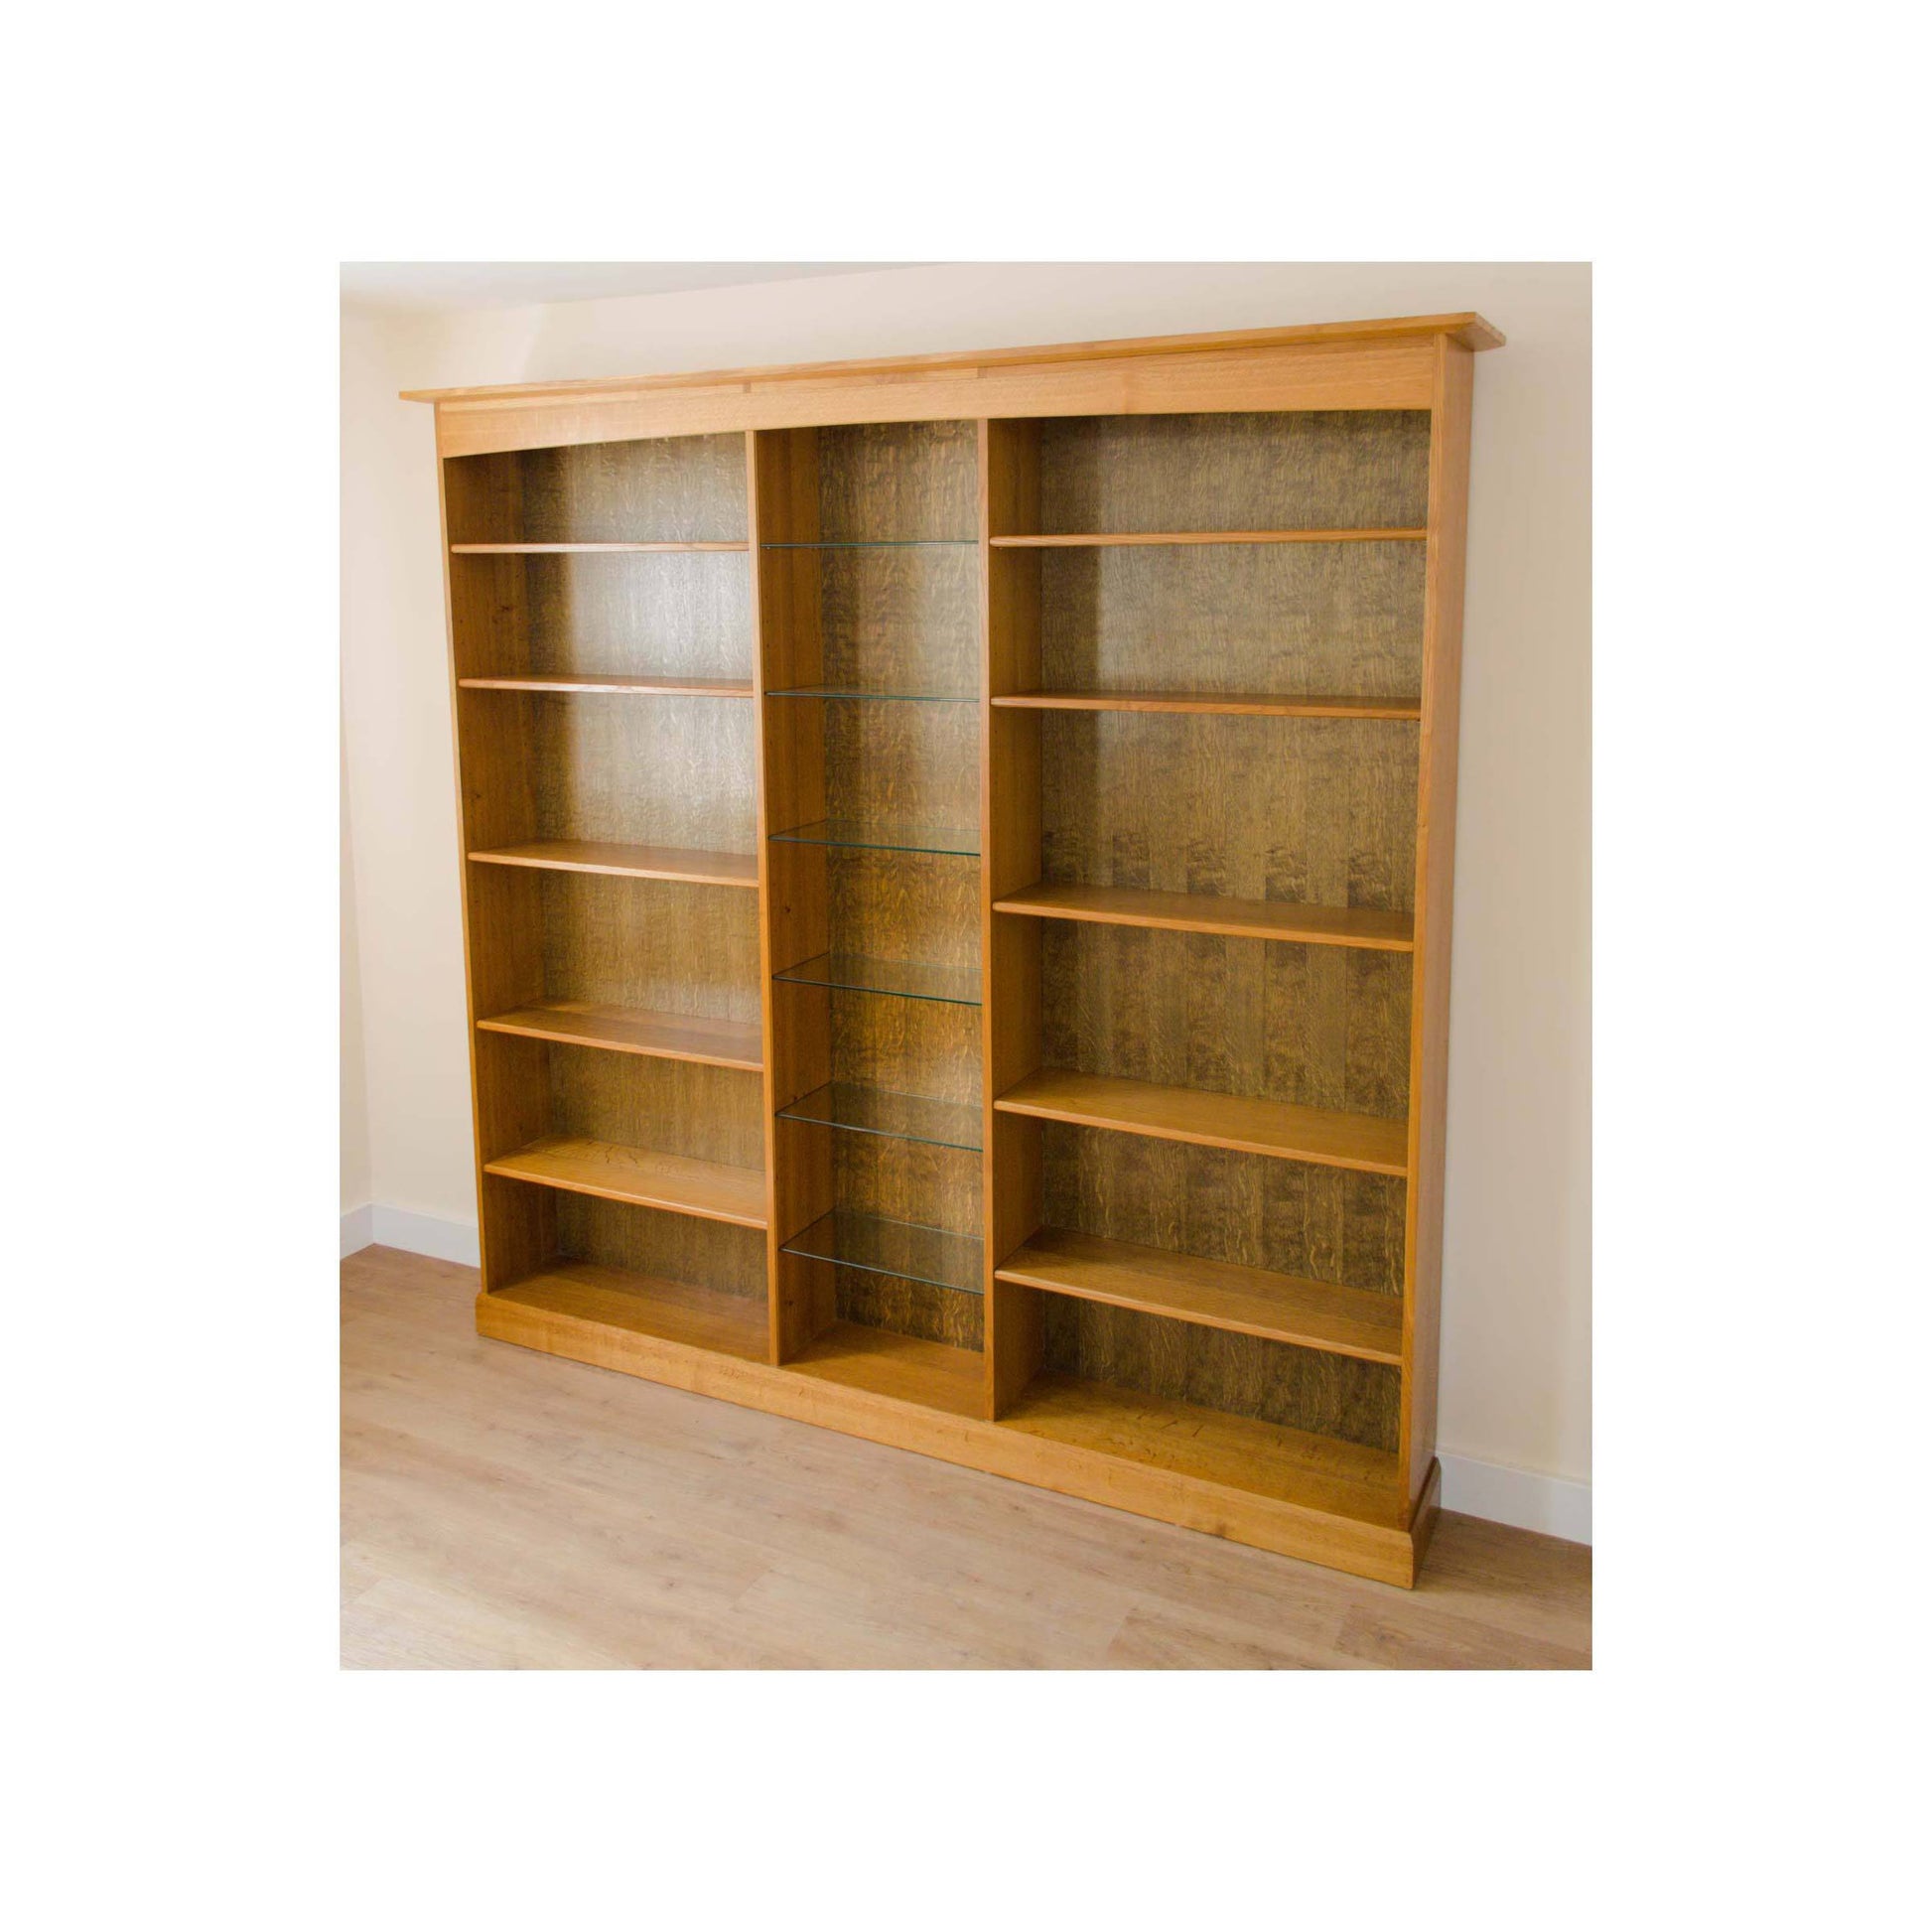 Peter Hall Peter Hall Arts and Crafts Handmade Contemporary Oak Bookcase